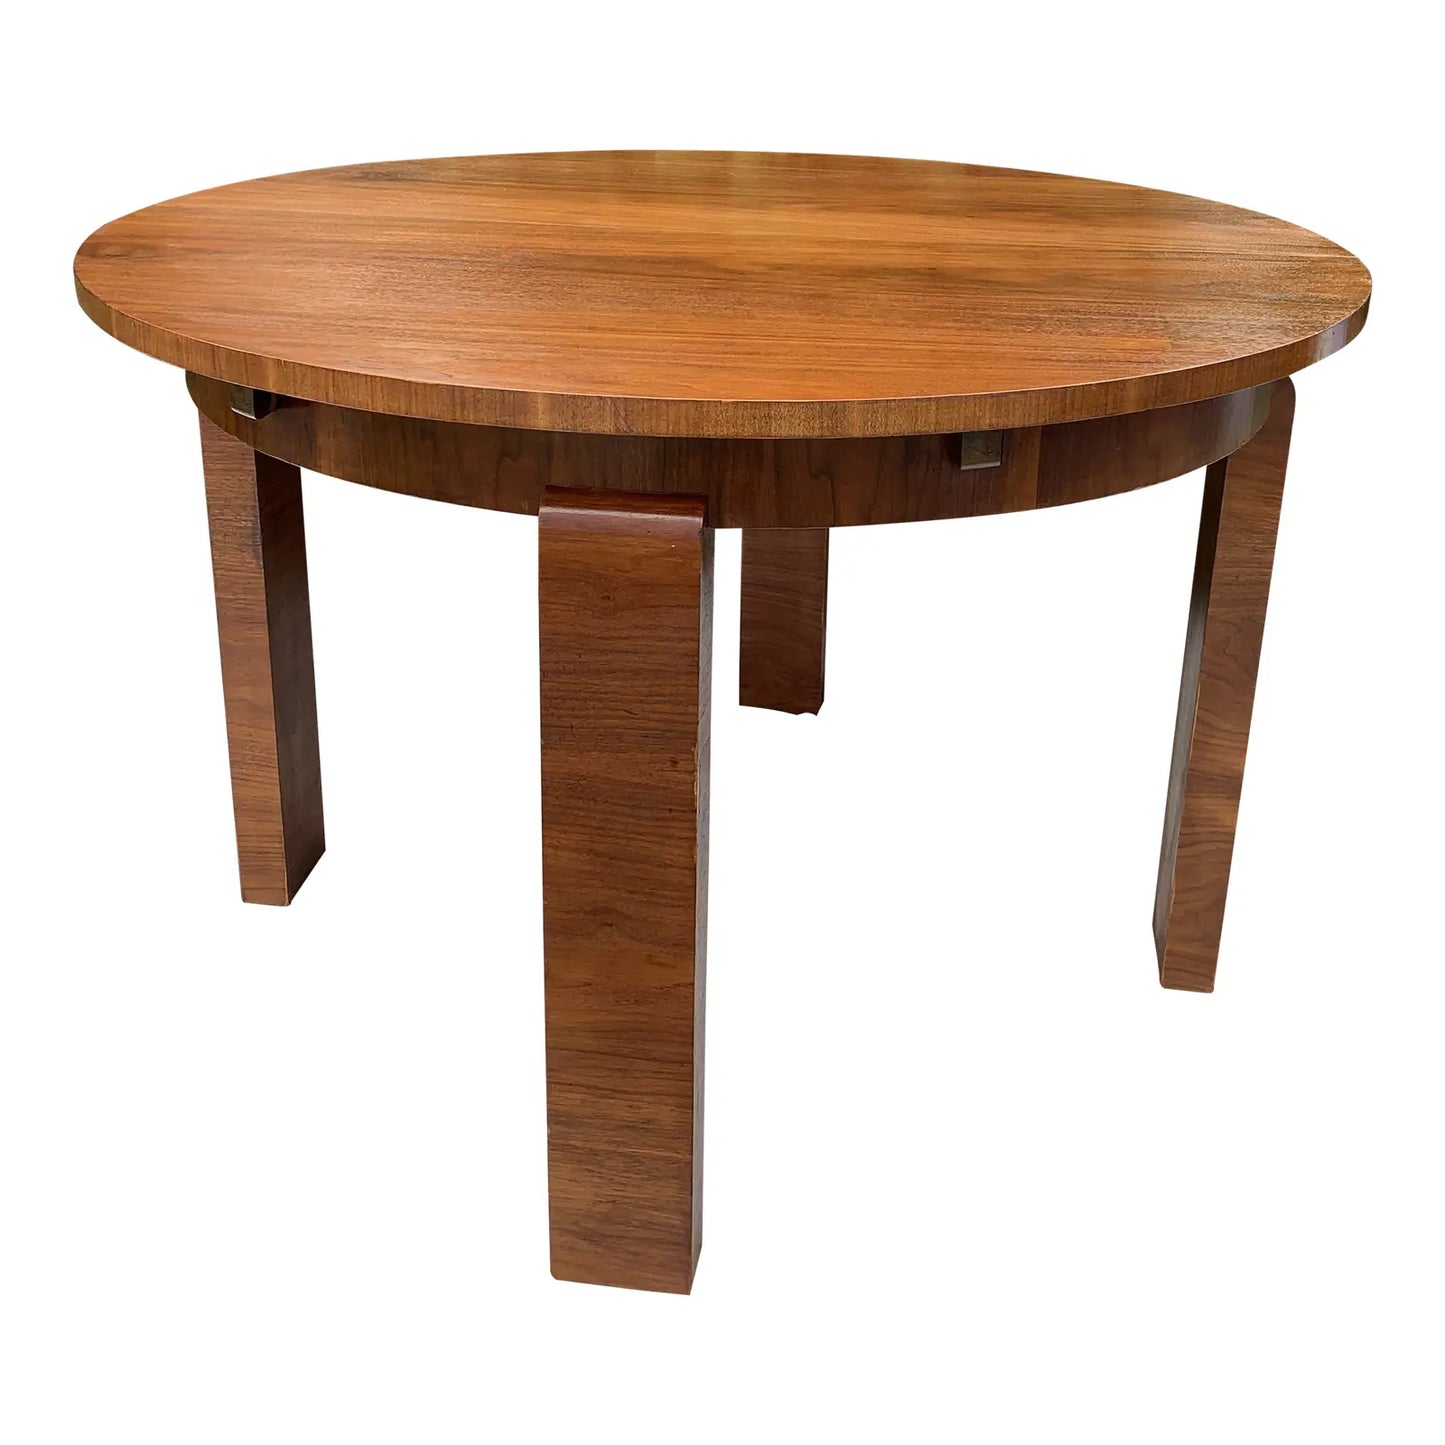 1950s Art Deco Style Circular Expandable Walnut Dining Table With Waterfall Leg